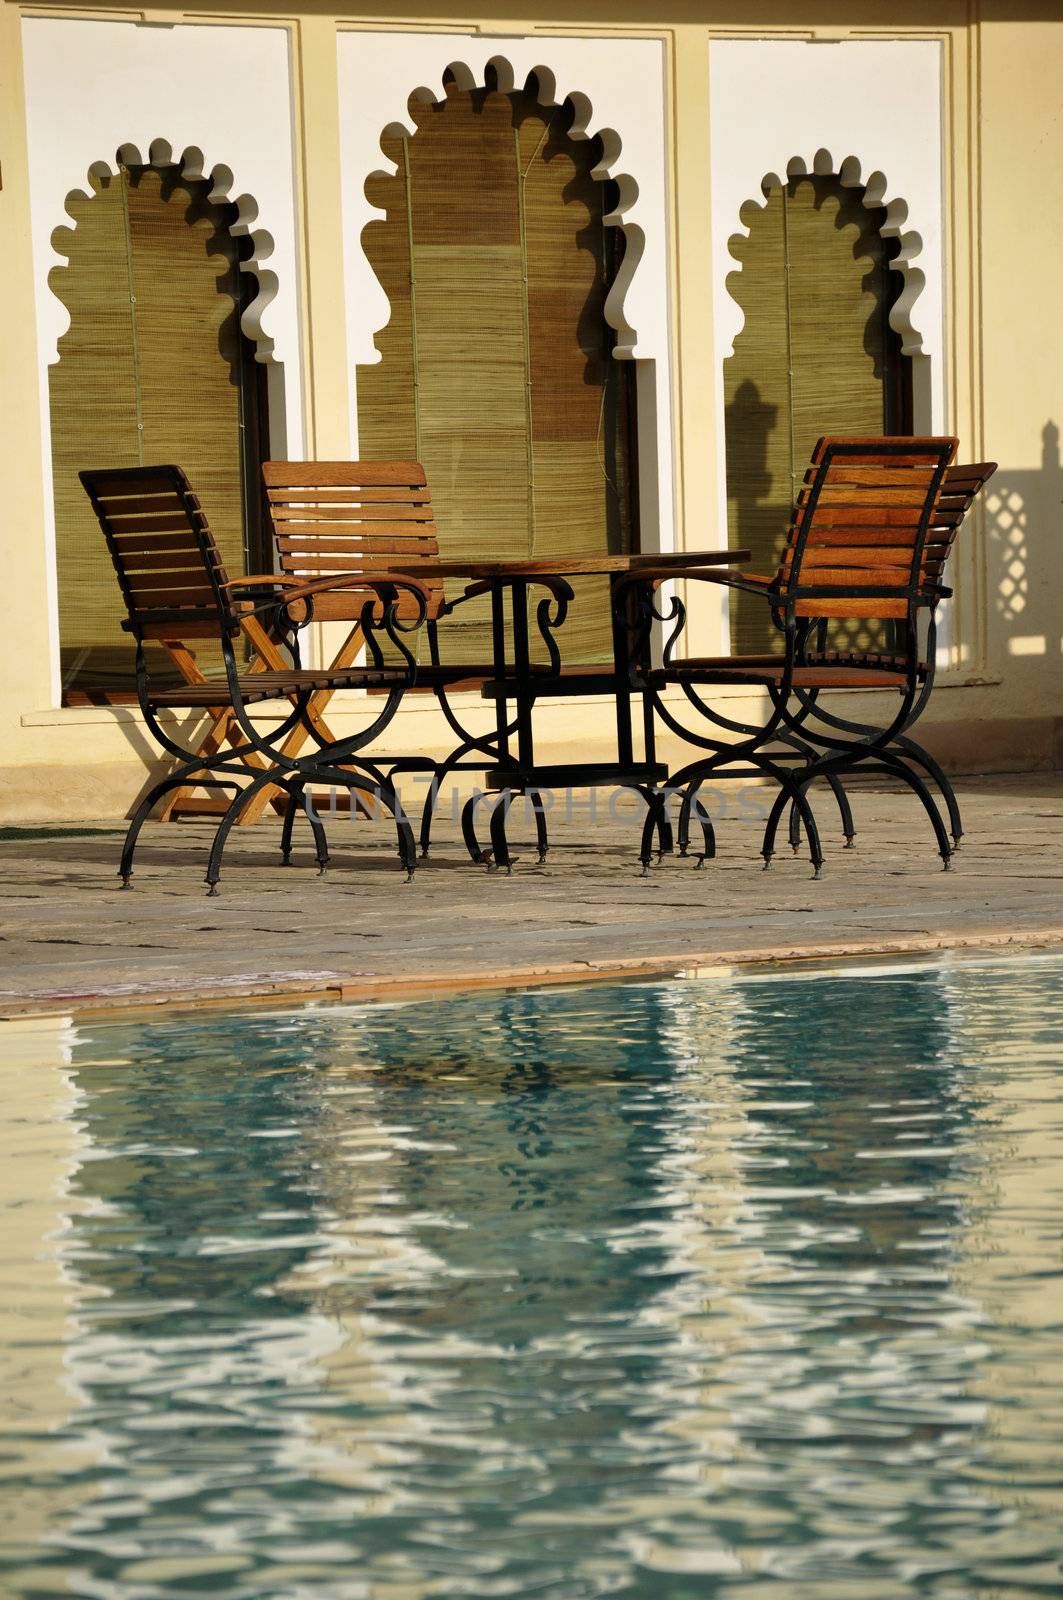 Wooden chairs by a swimming pool against medieval architecture in Udaipur, India by kdreams02